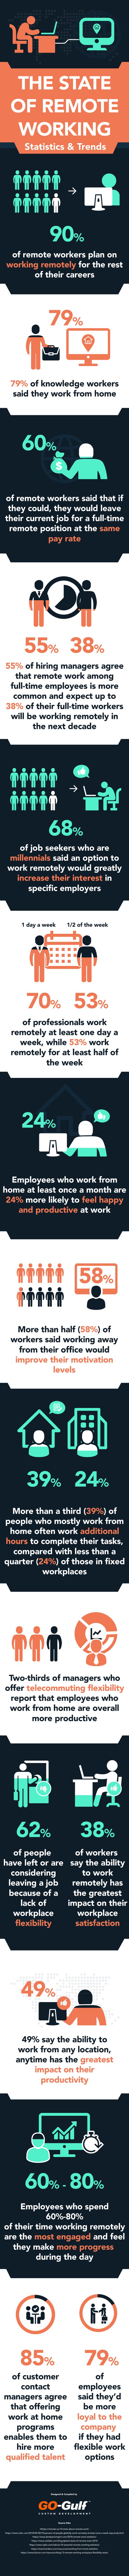 The State of Remote Working – Statistics and Trends